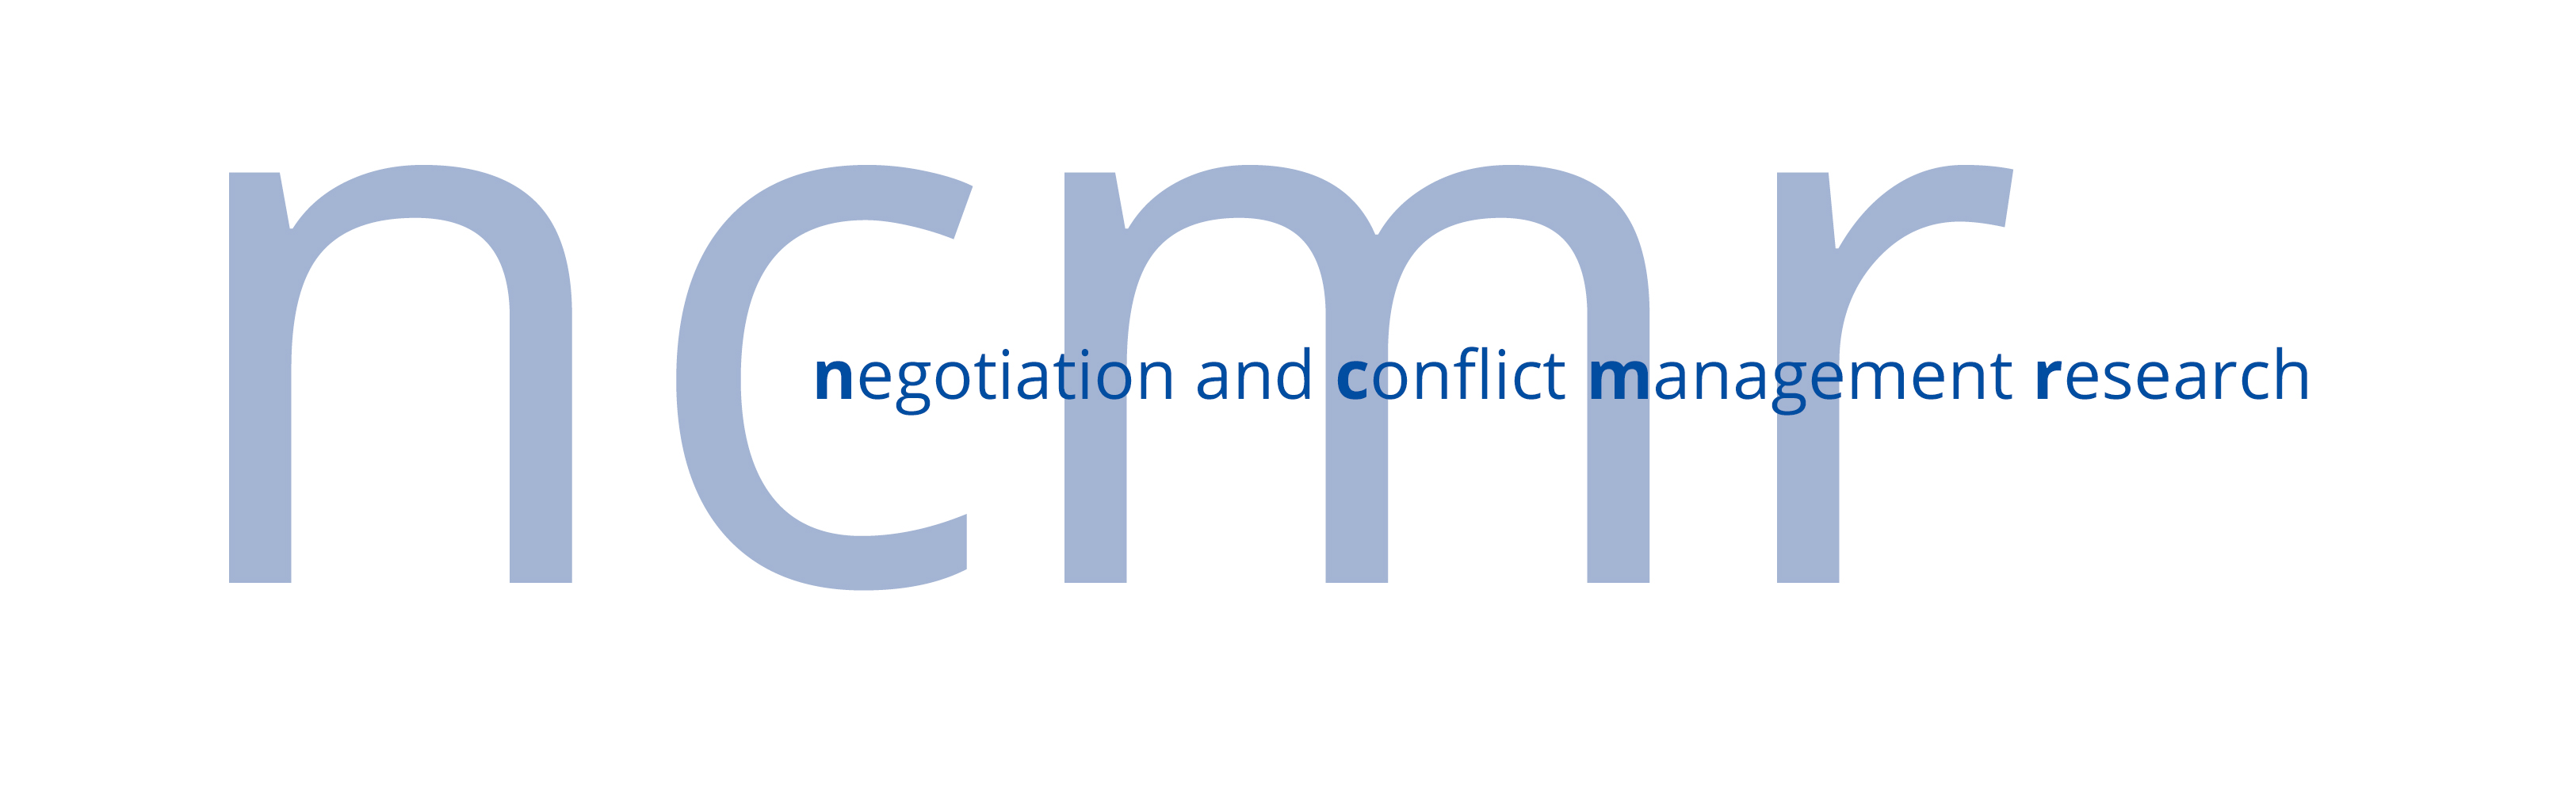 conflict management research papers pdf 2020